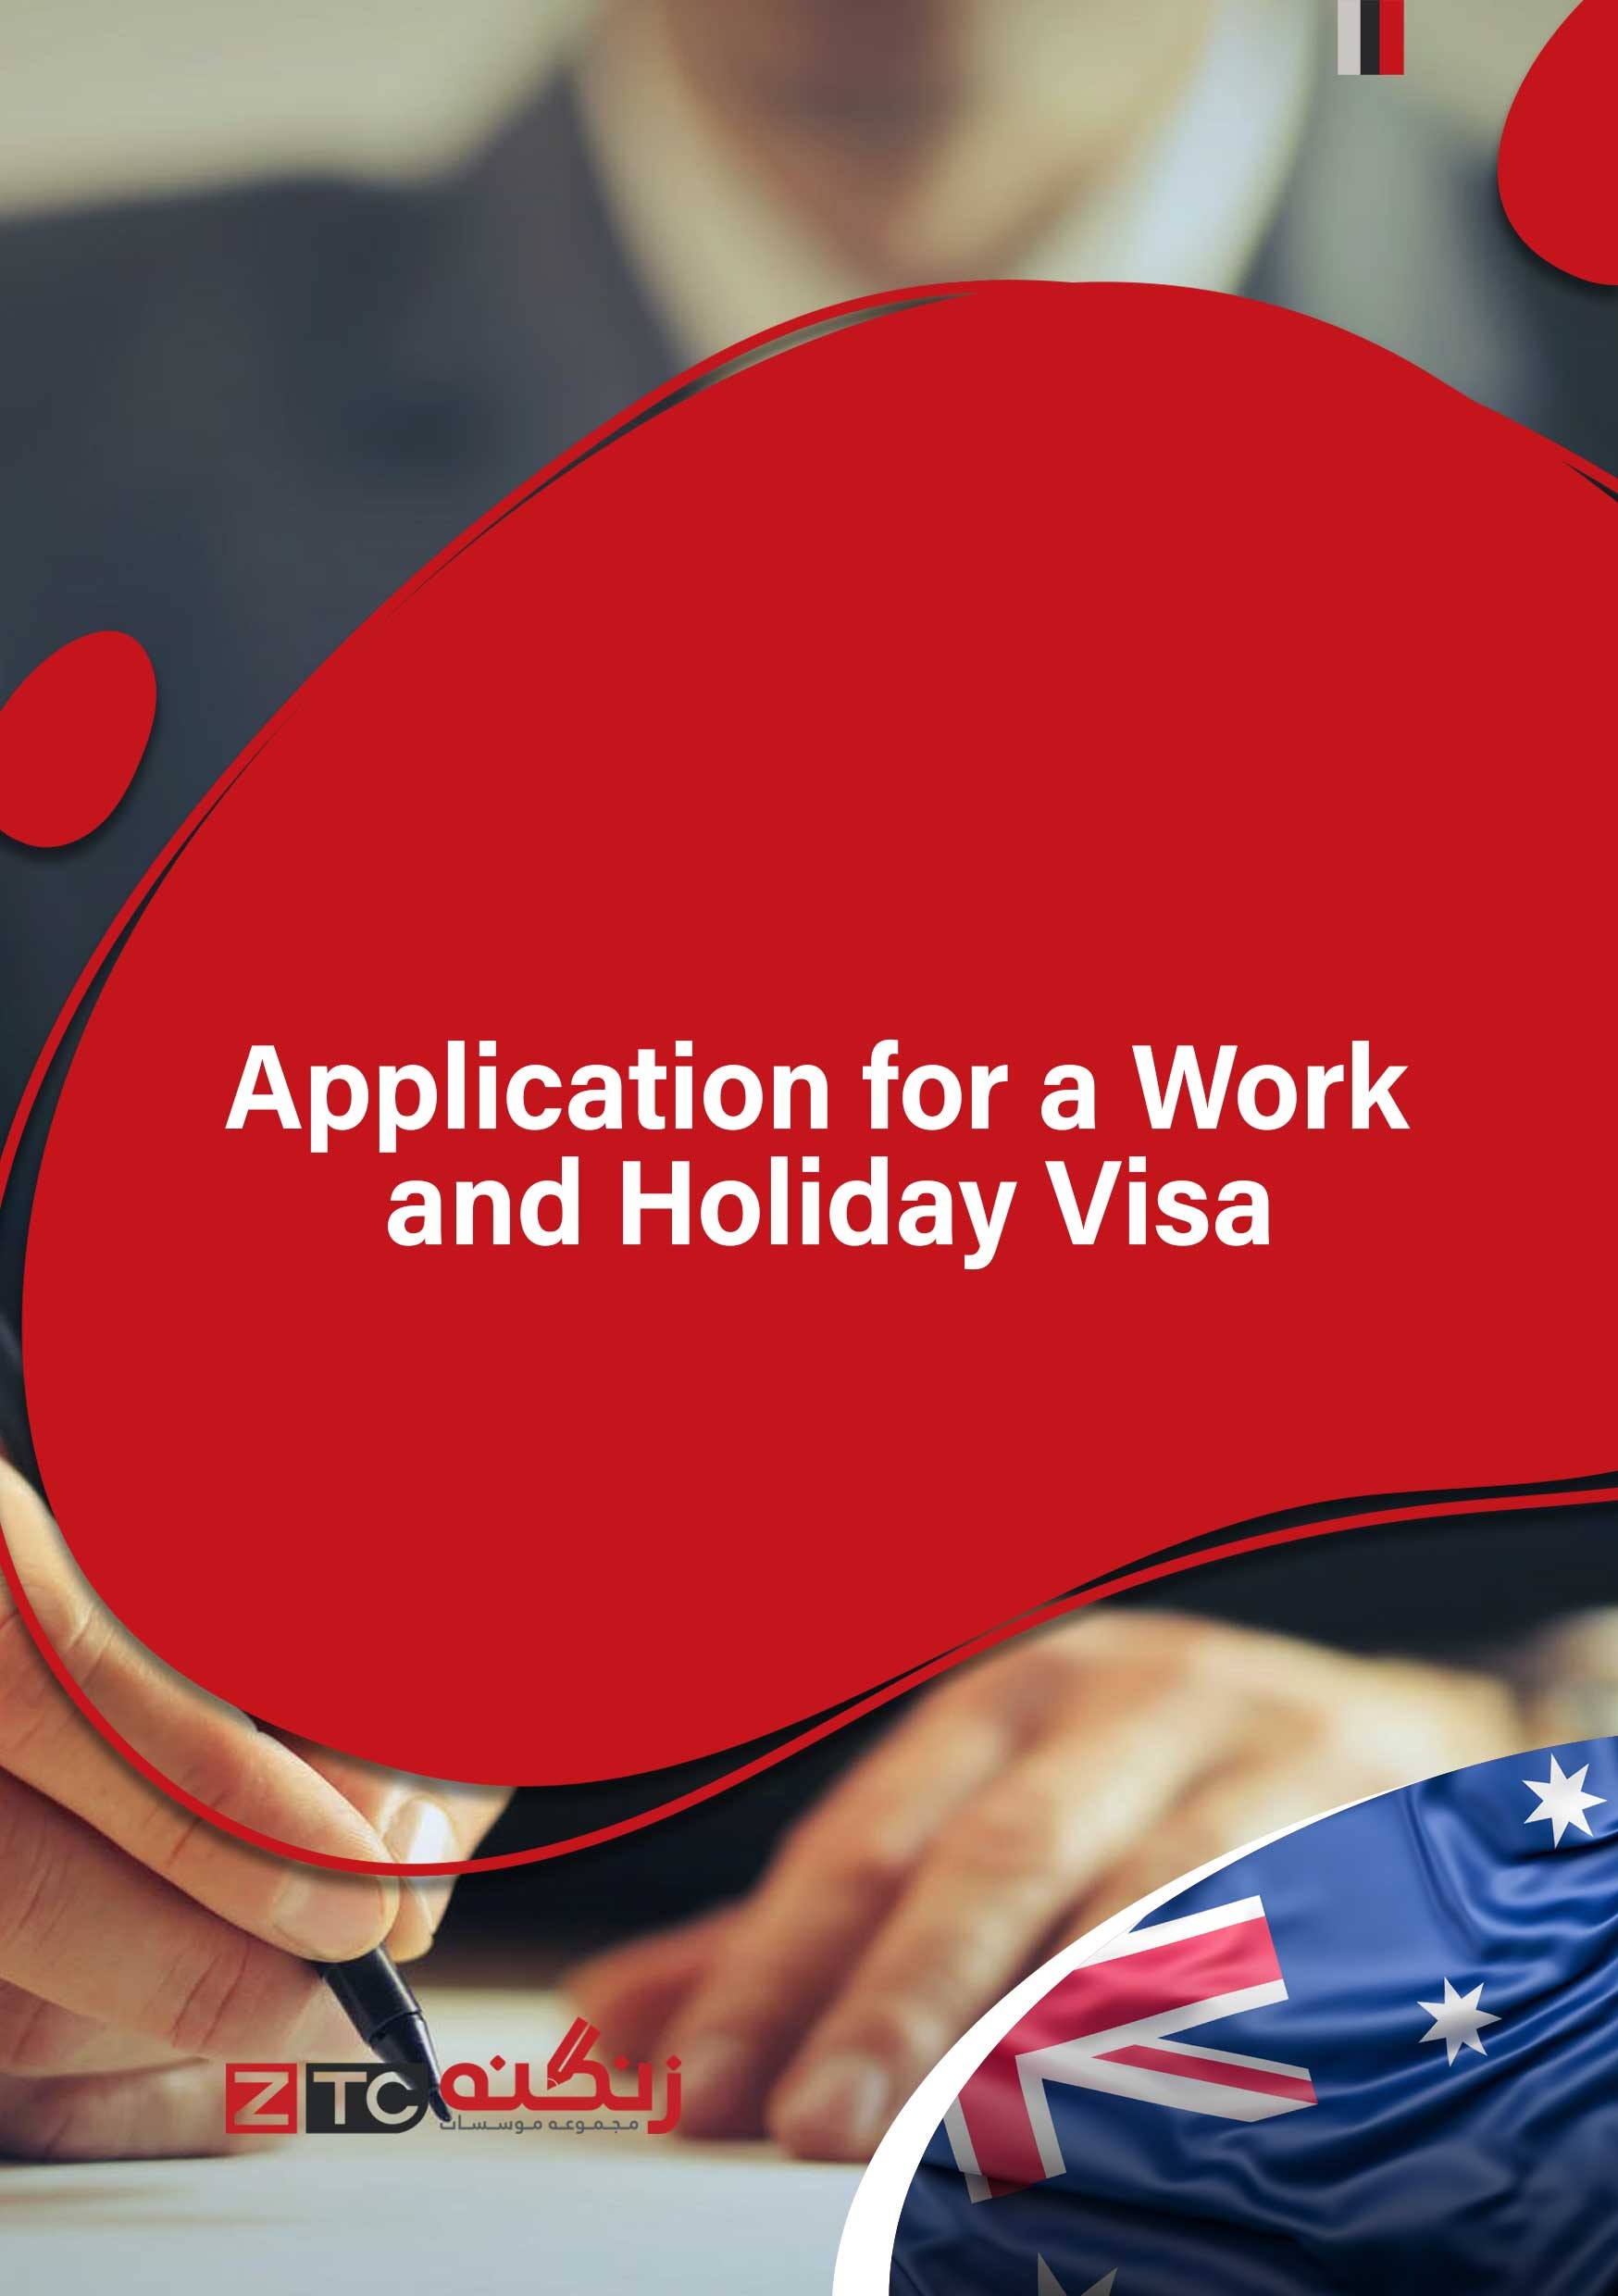 Application for a Work and Holiday Visa